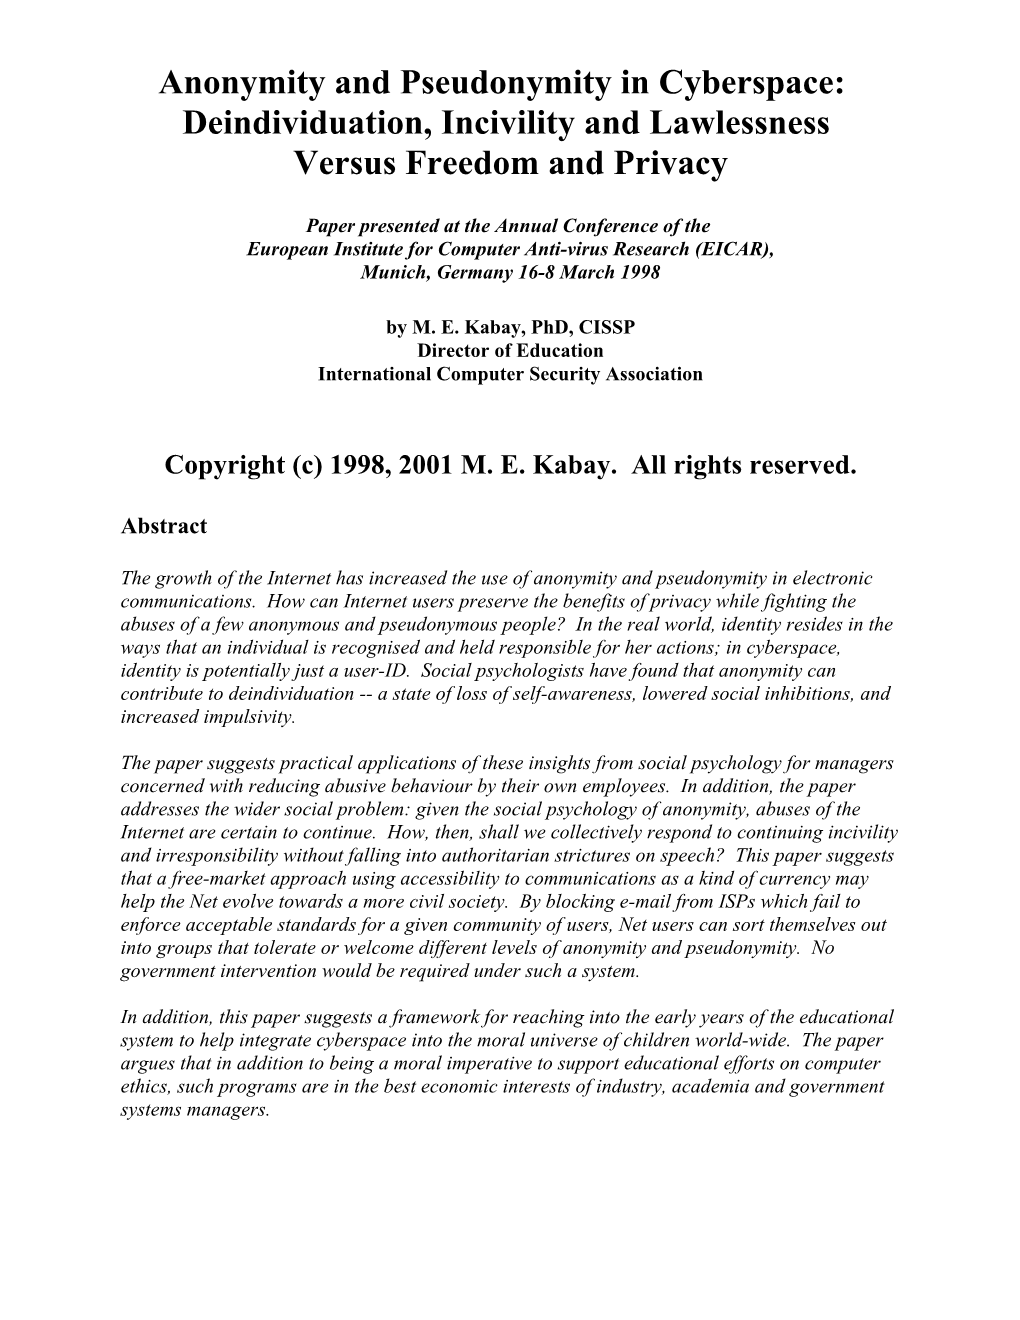 Anonymity and Pseudonymity in Cyberspace: Deindividuation, Incivility and Lawlessness Versus Freedom and Privacy